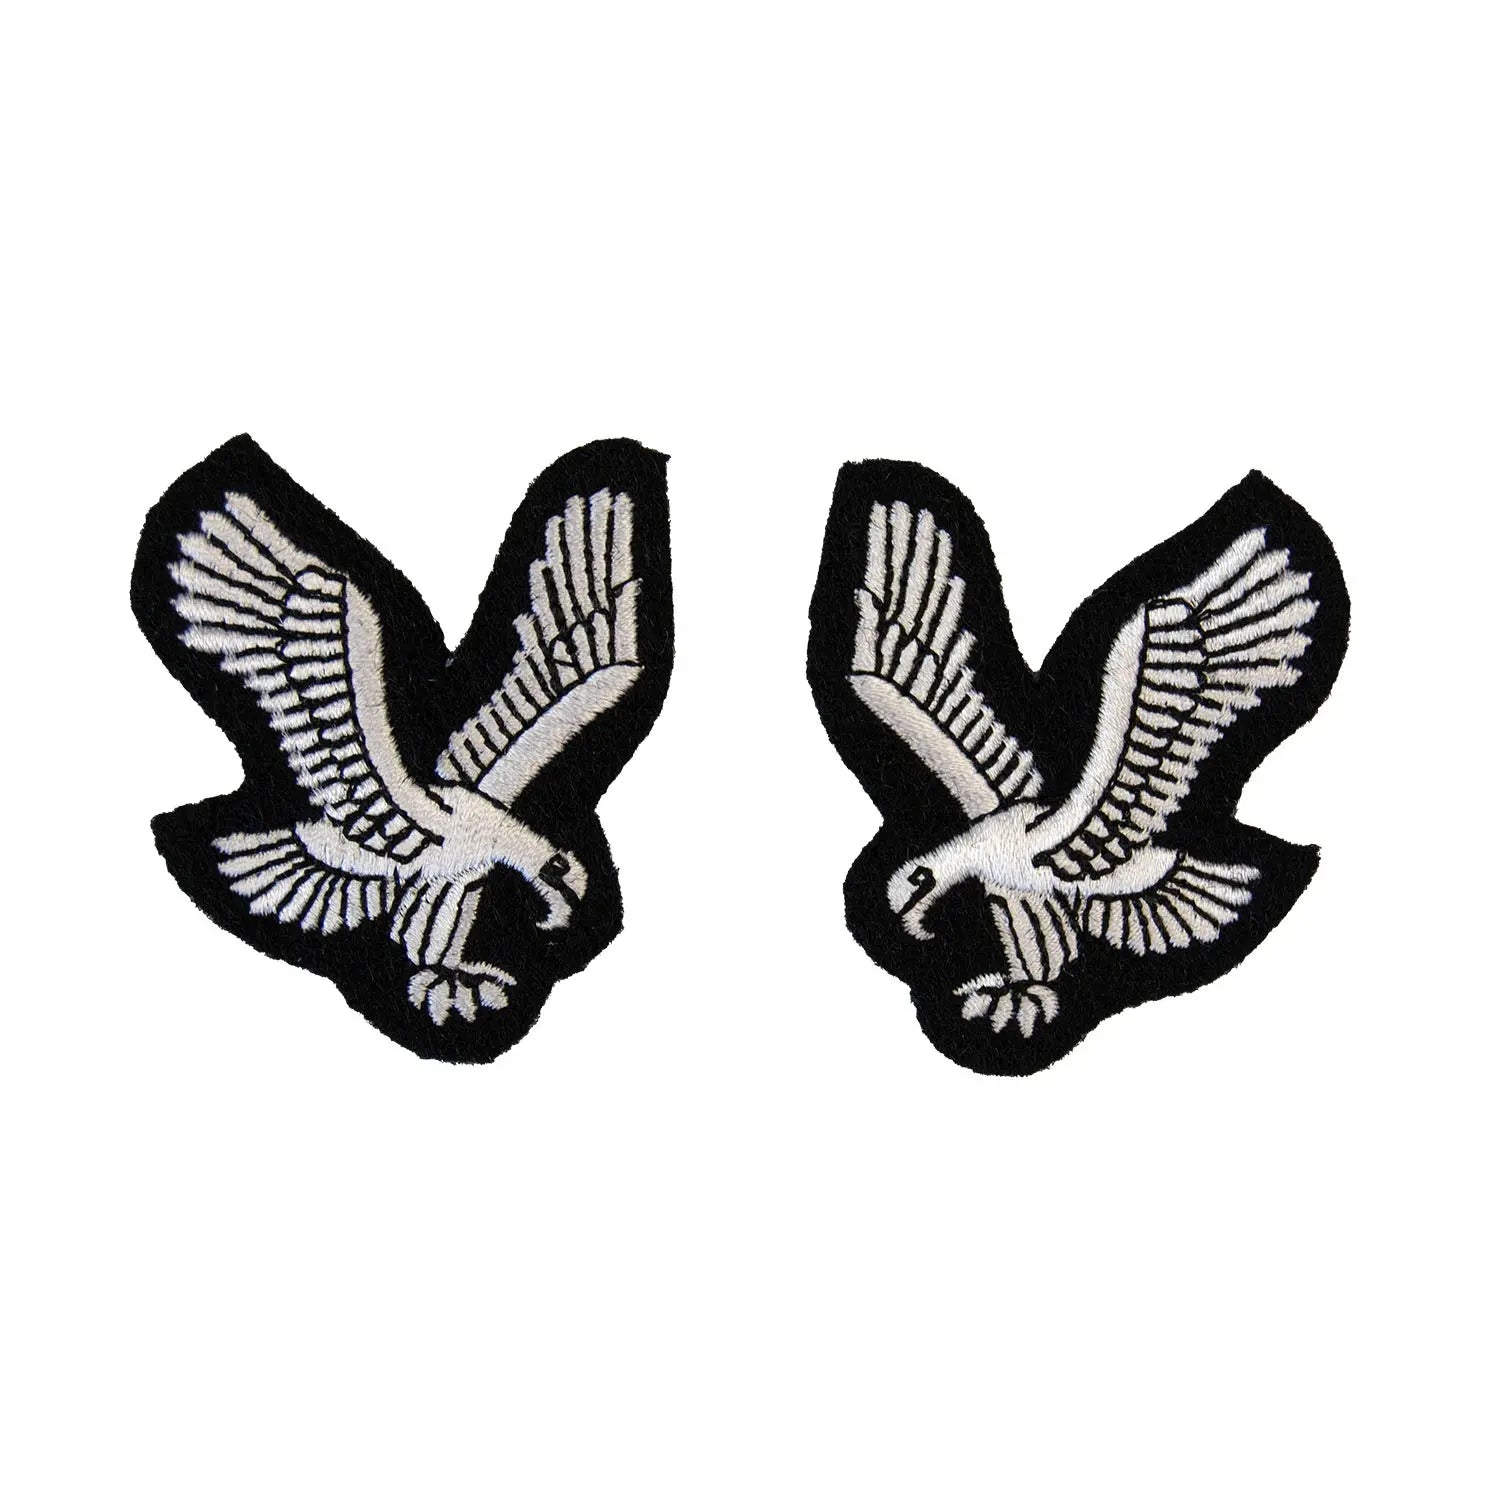 Staff Sergeant and Sergeant Organisation Insignia Army Air Corps Badge wyedean